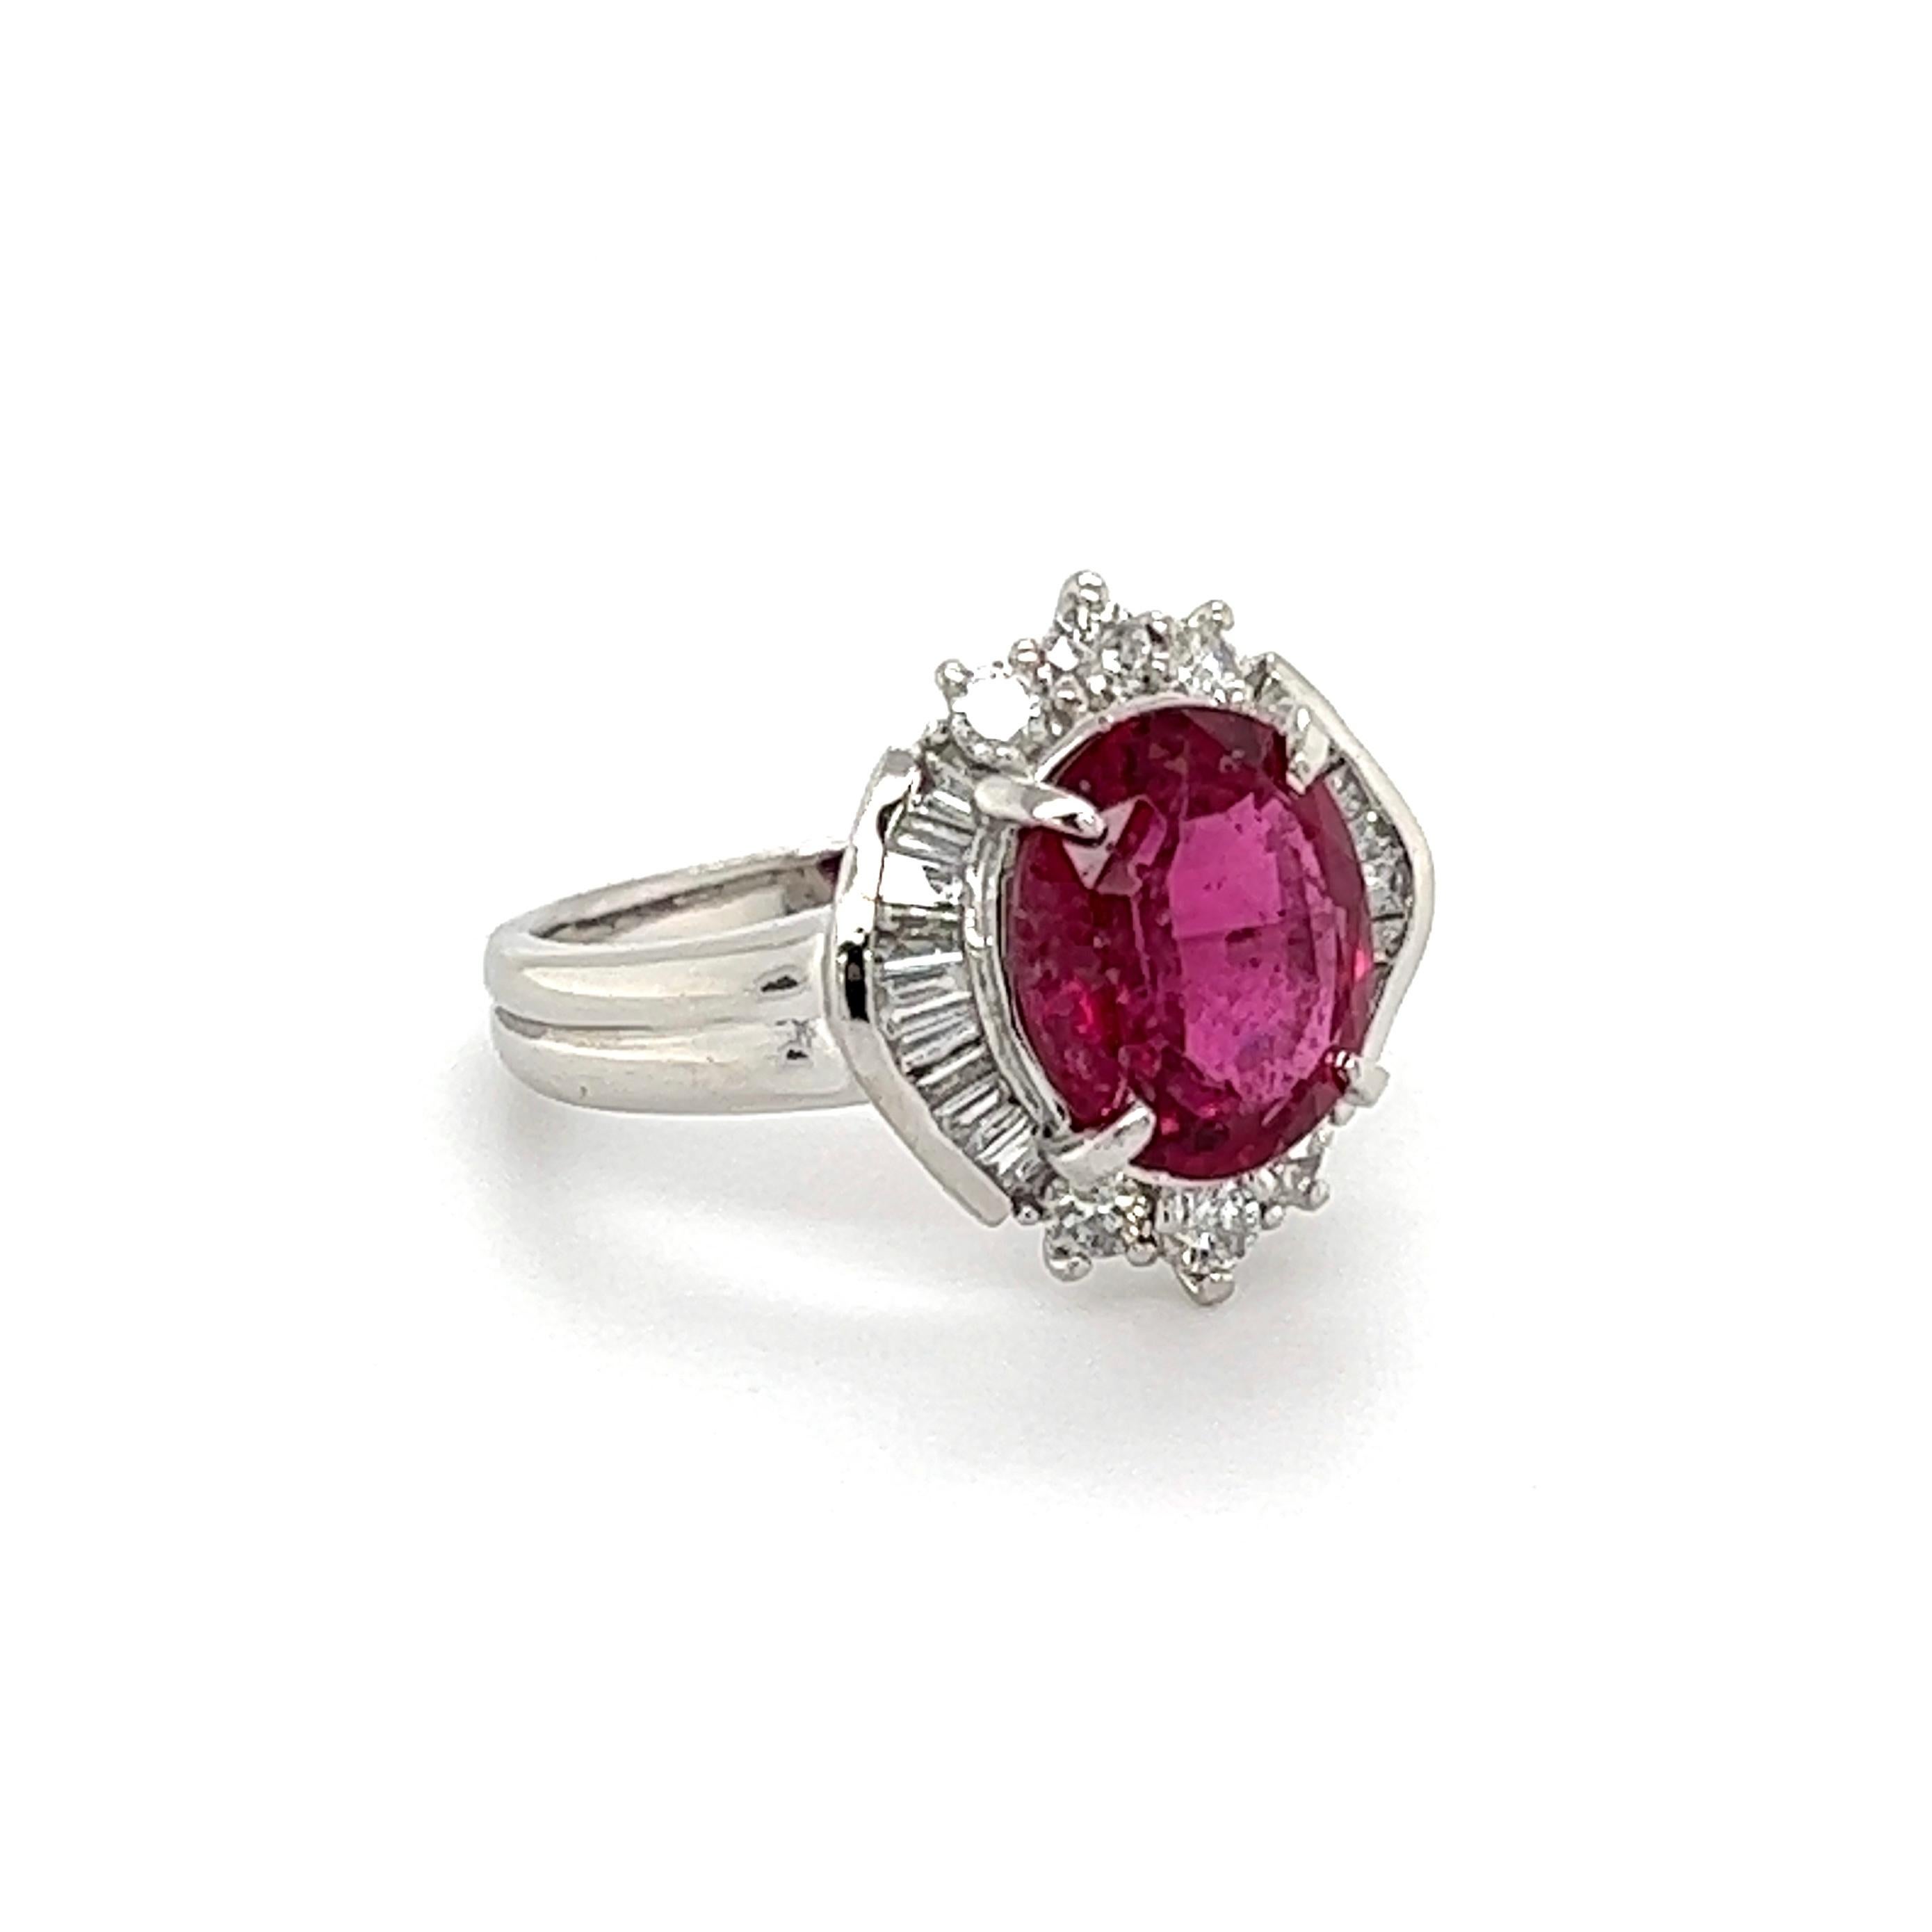 Simply Beautiful! Finely crafted Rubelite Tourmaline and Diamond Cocktail Ring, centering a securely nestled Rubelite Tourmaline, weighing approx. 2.23 Carat, surrounded by round and baguette Diamonds, weighing approx. 0.46tcw. Hand crafted Platinum